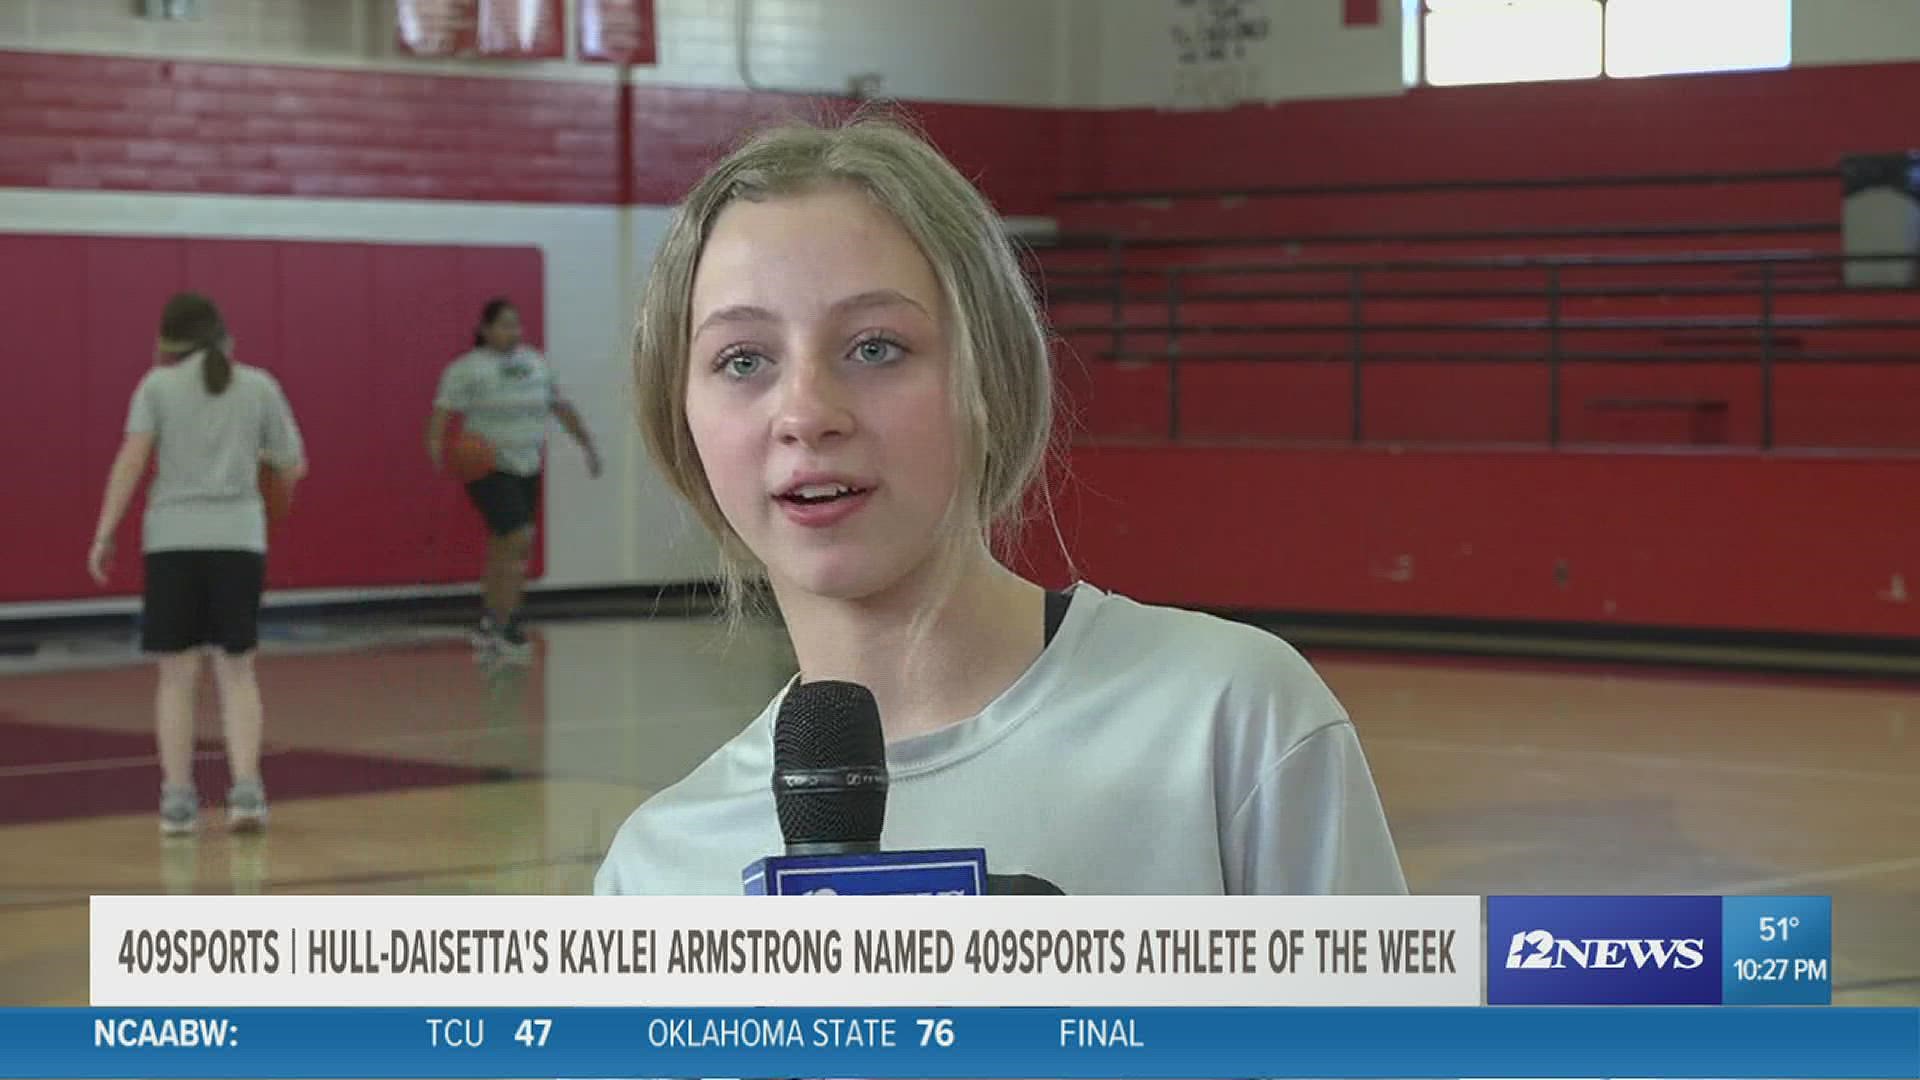 Hull-Daisetta's Kaylei Armstrong is setting career highs and breaking school records as a sophomore.